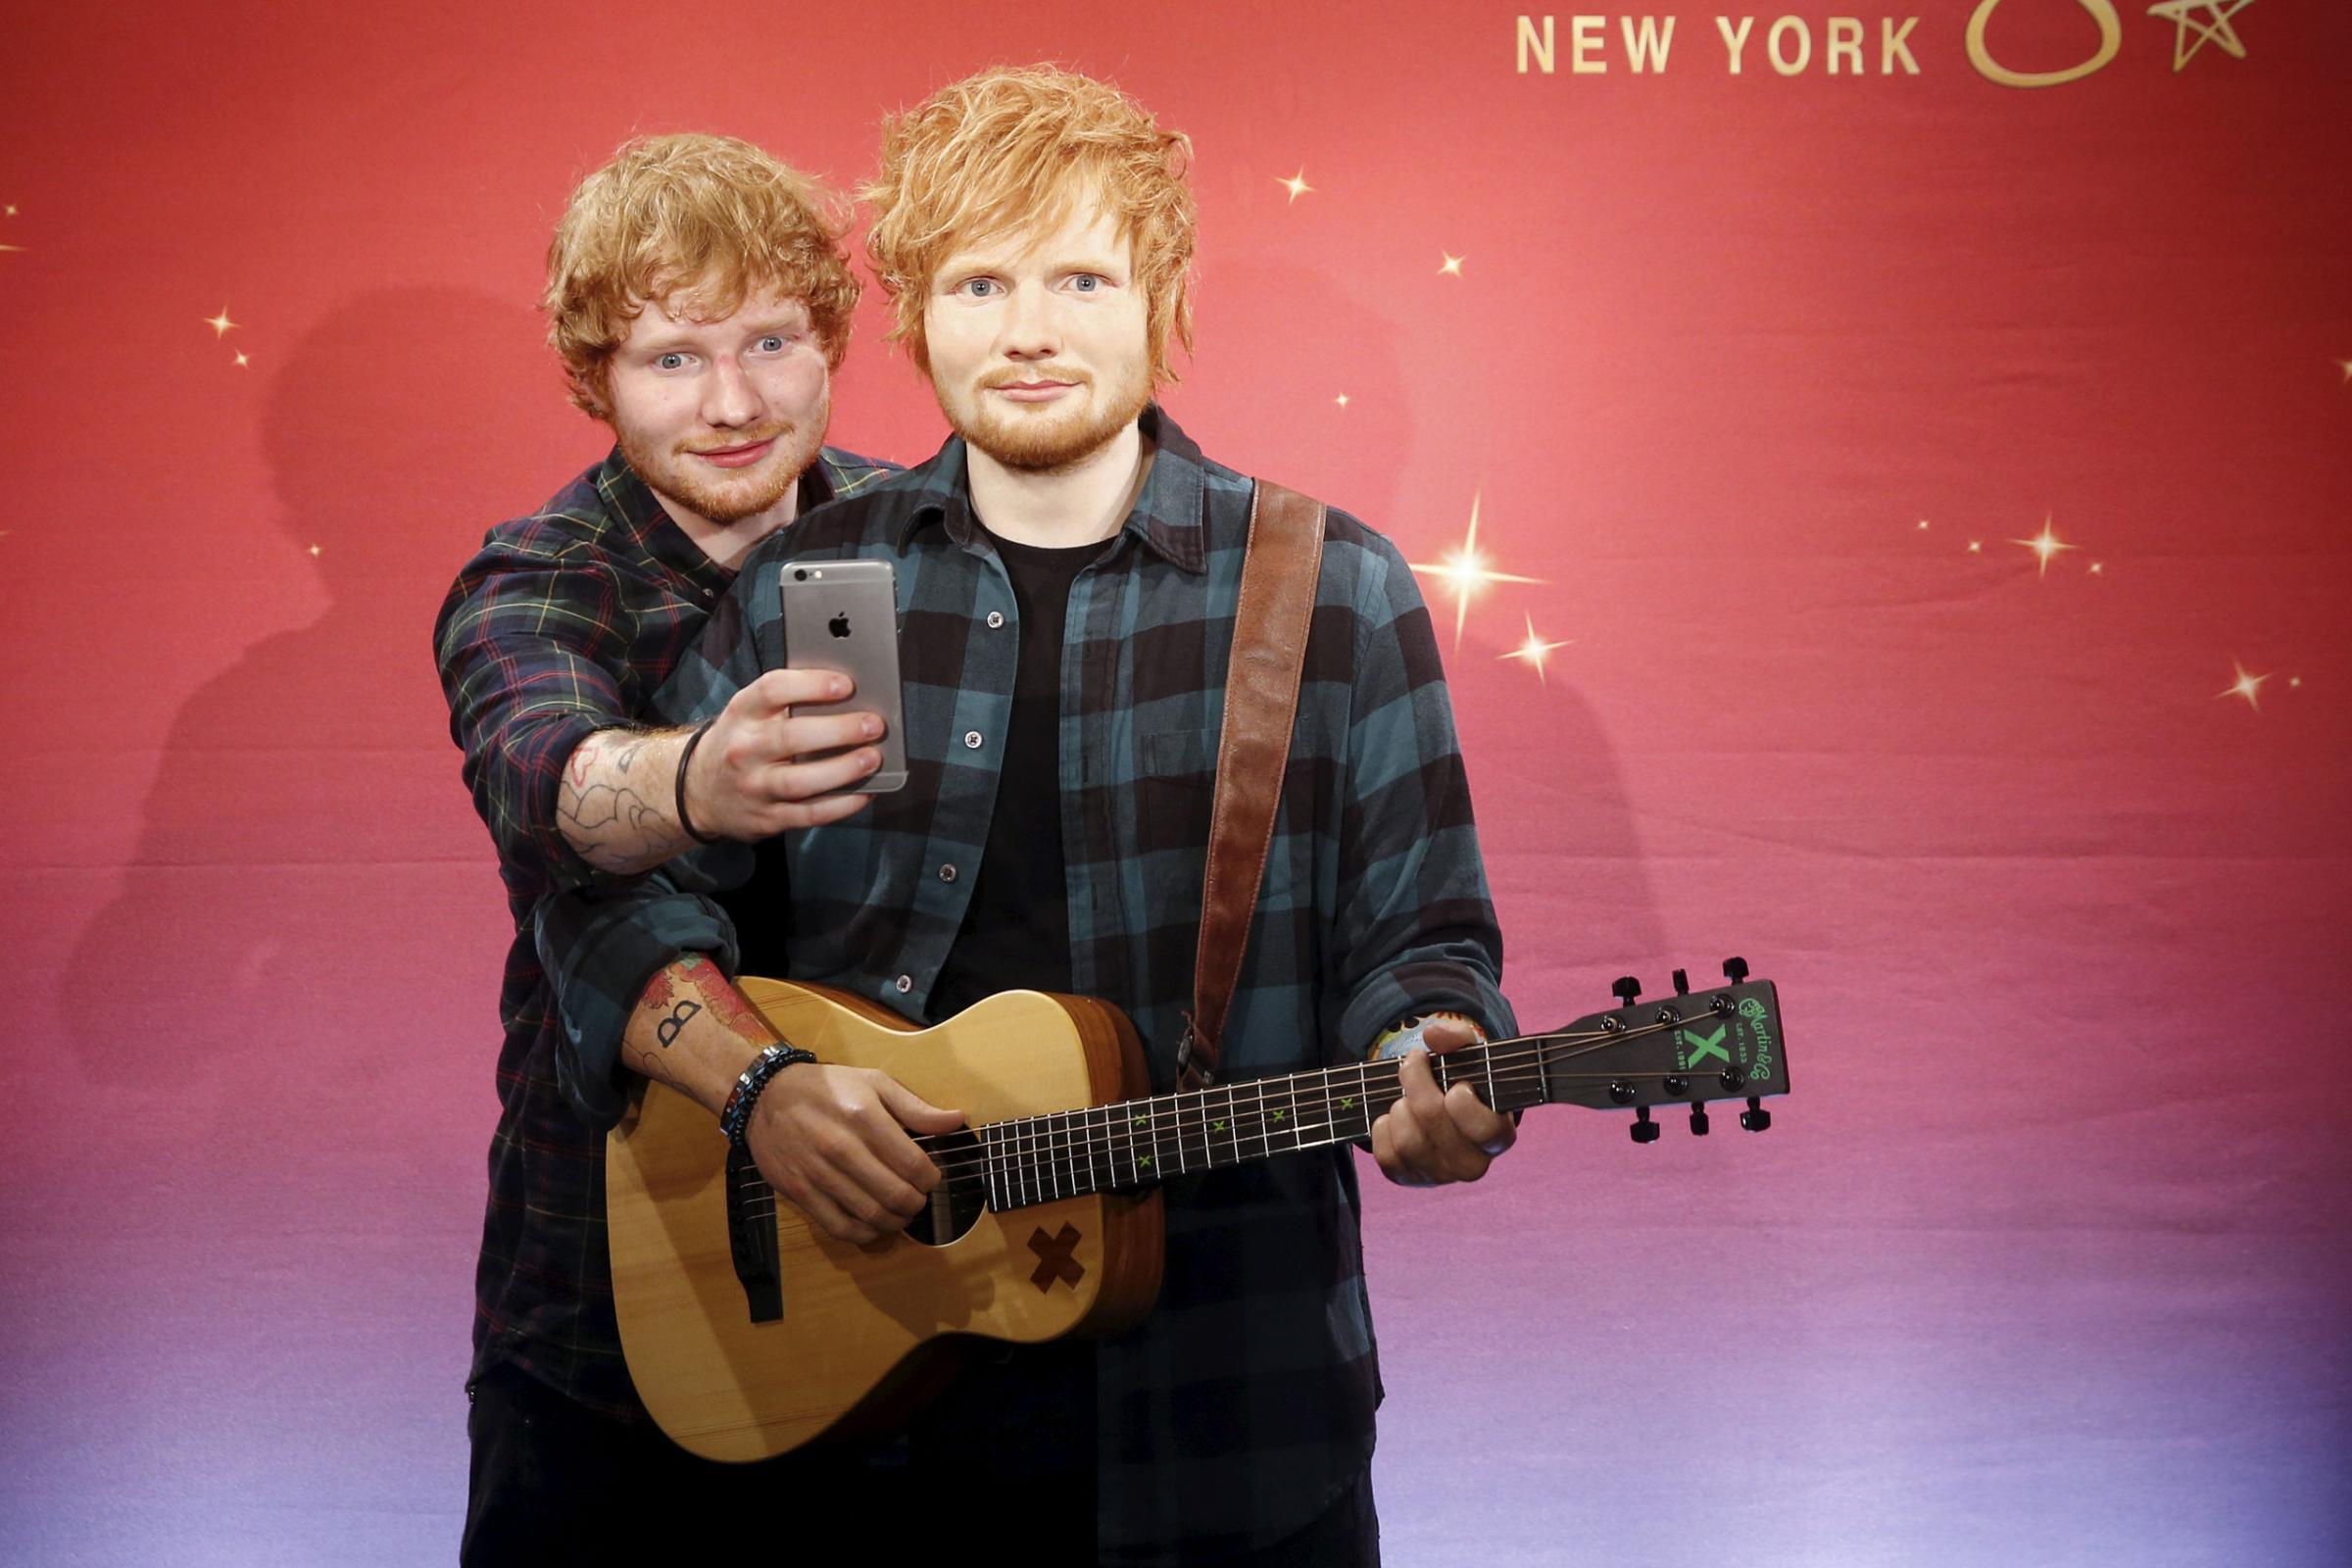 Musician Ed Sheeran takes a "selfie" with his wax figure at Madame Tussauds museum in the Manhattan borough of New York